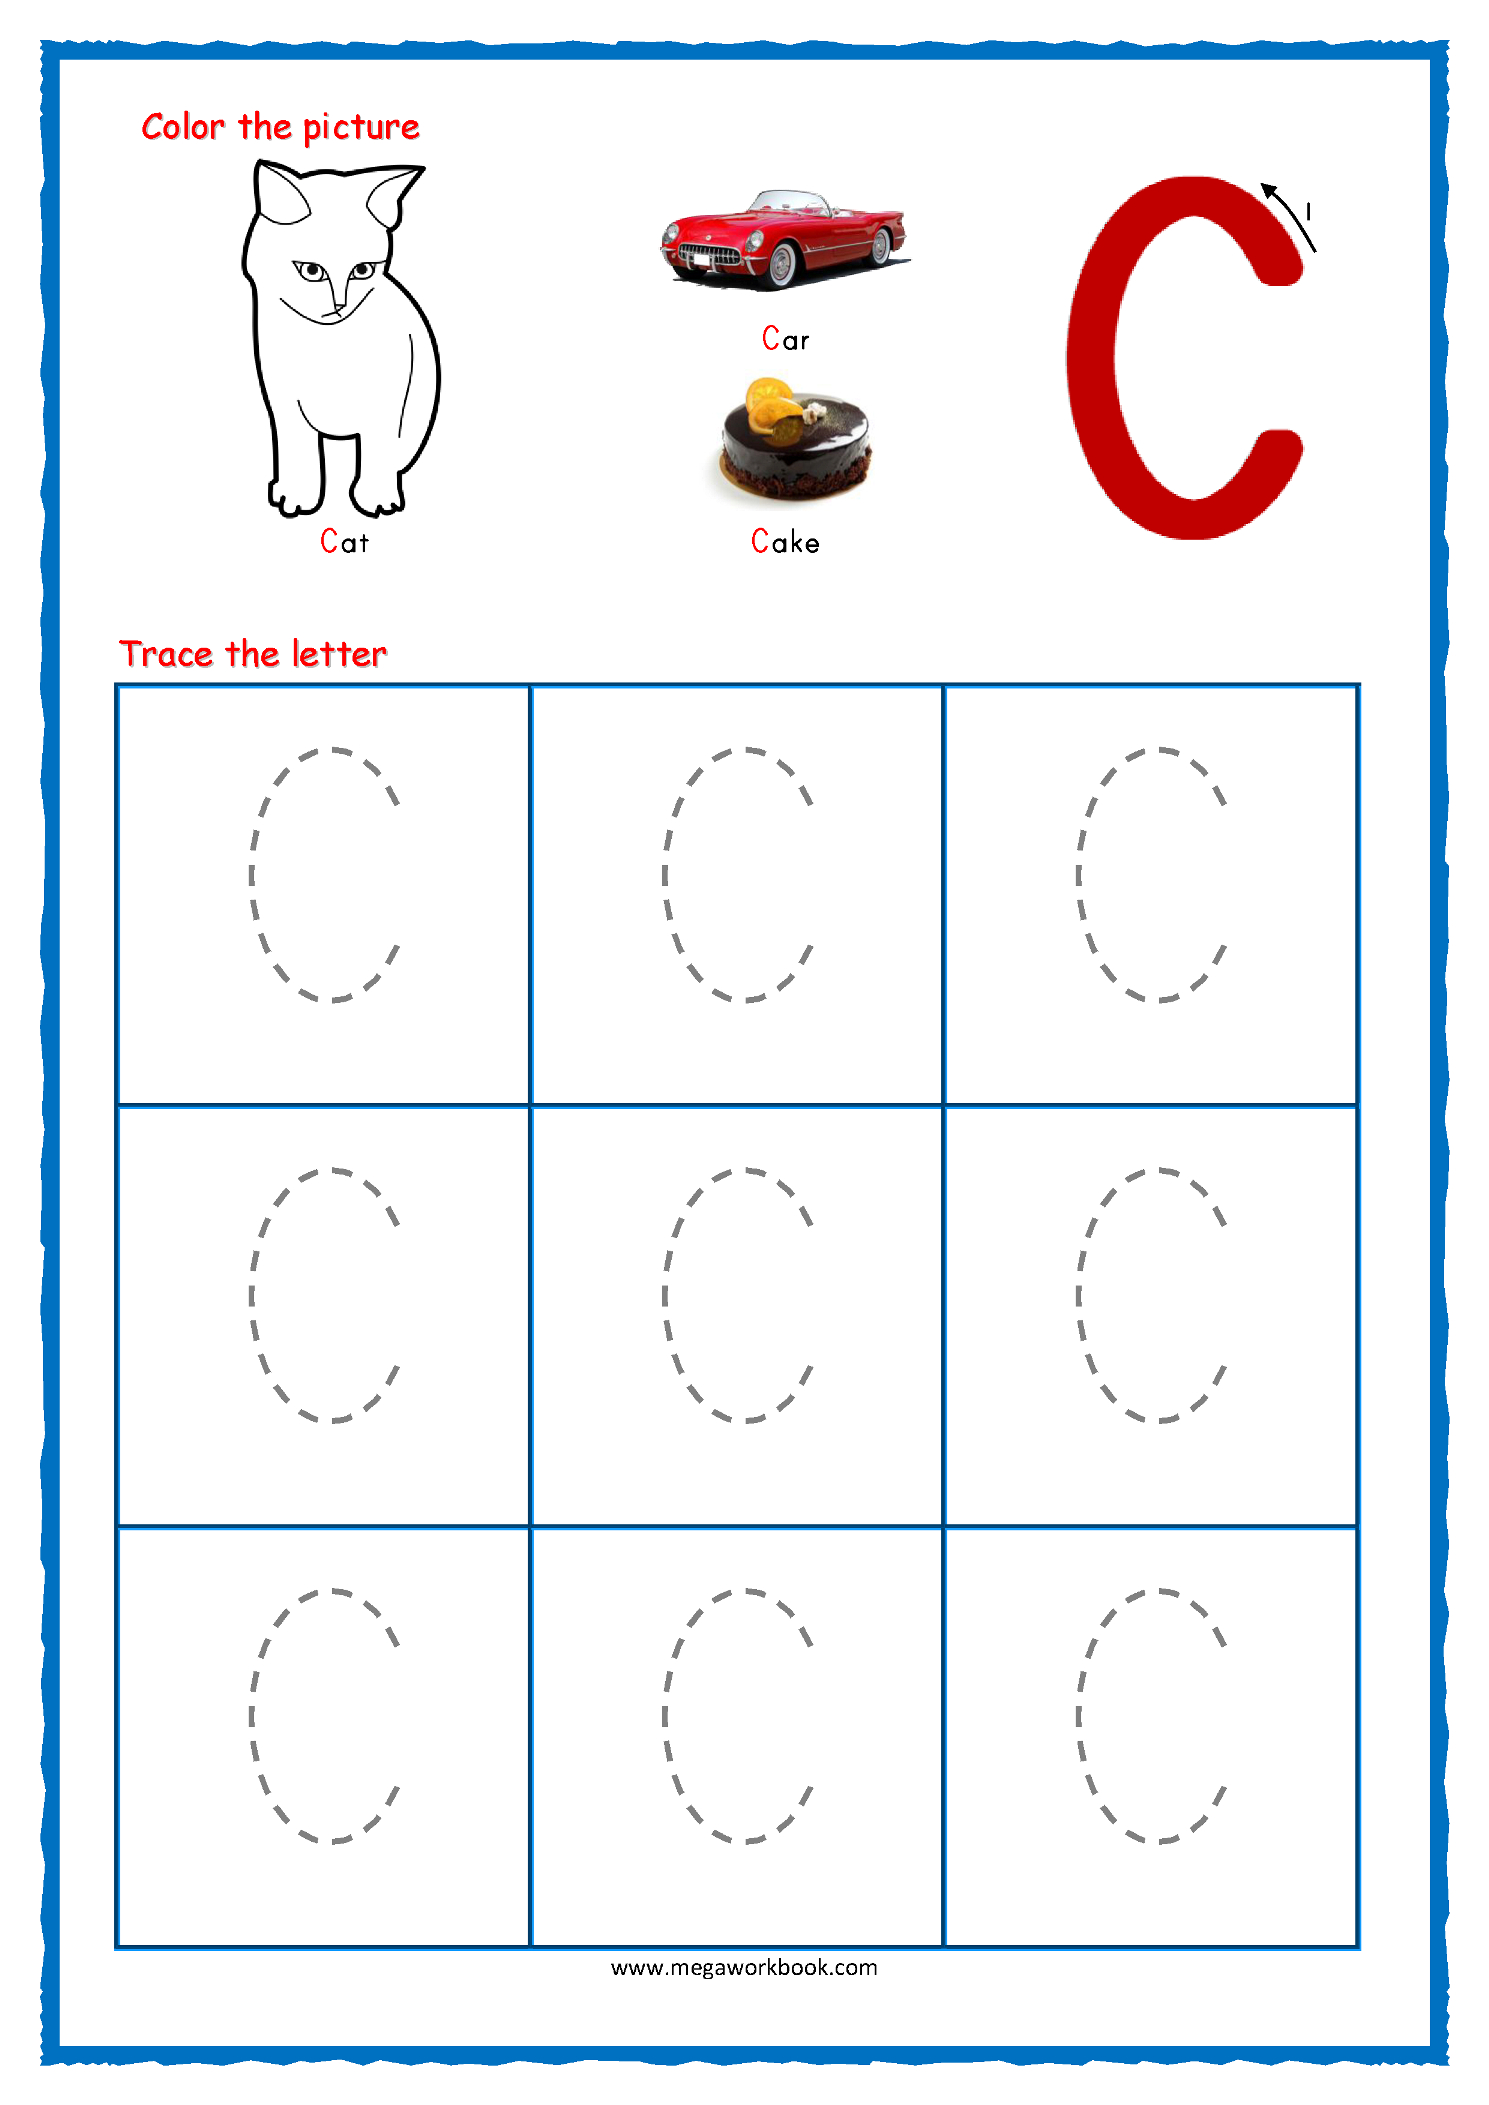 Tracing Letters - Alphabet Tracing - Capital Letters intended for Alphabet Tracing Cards